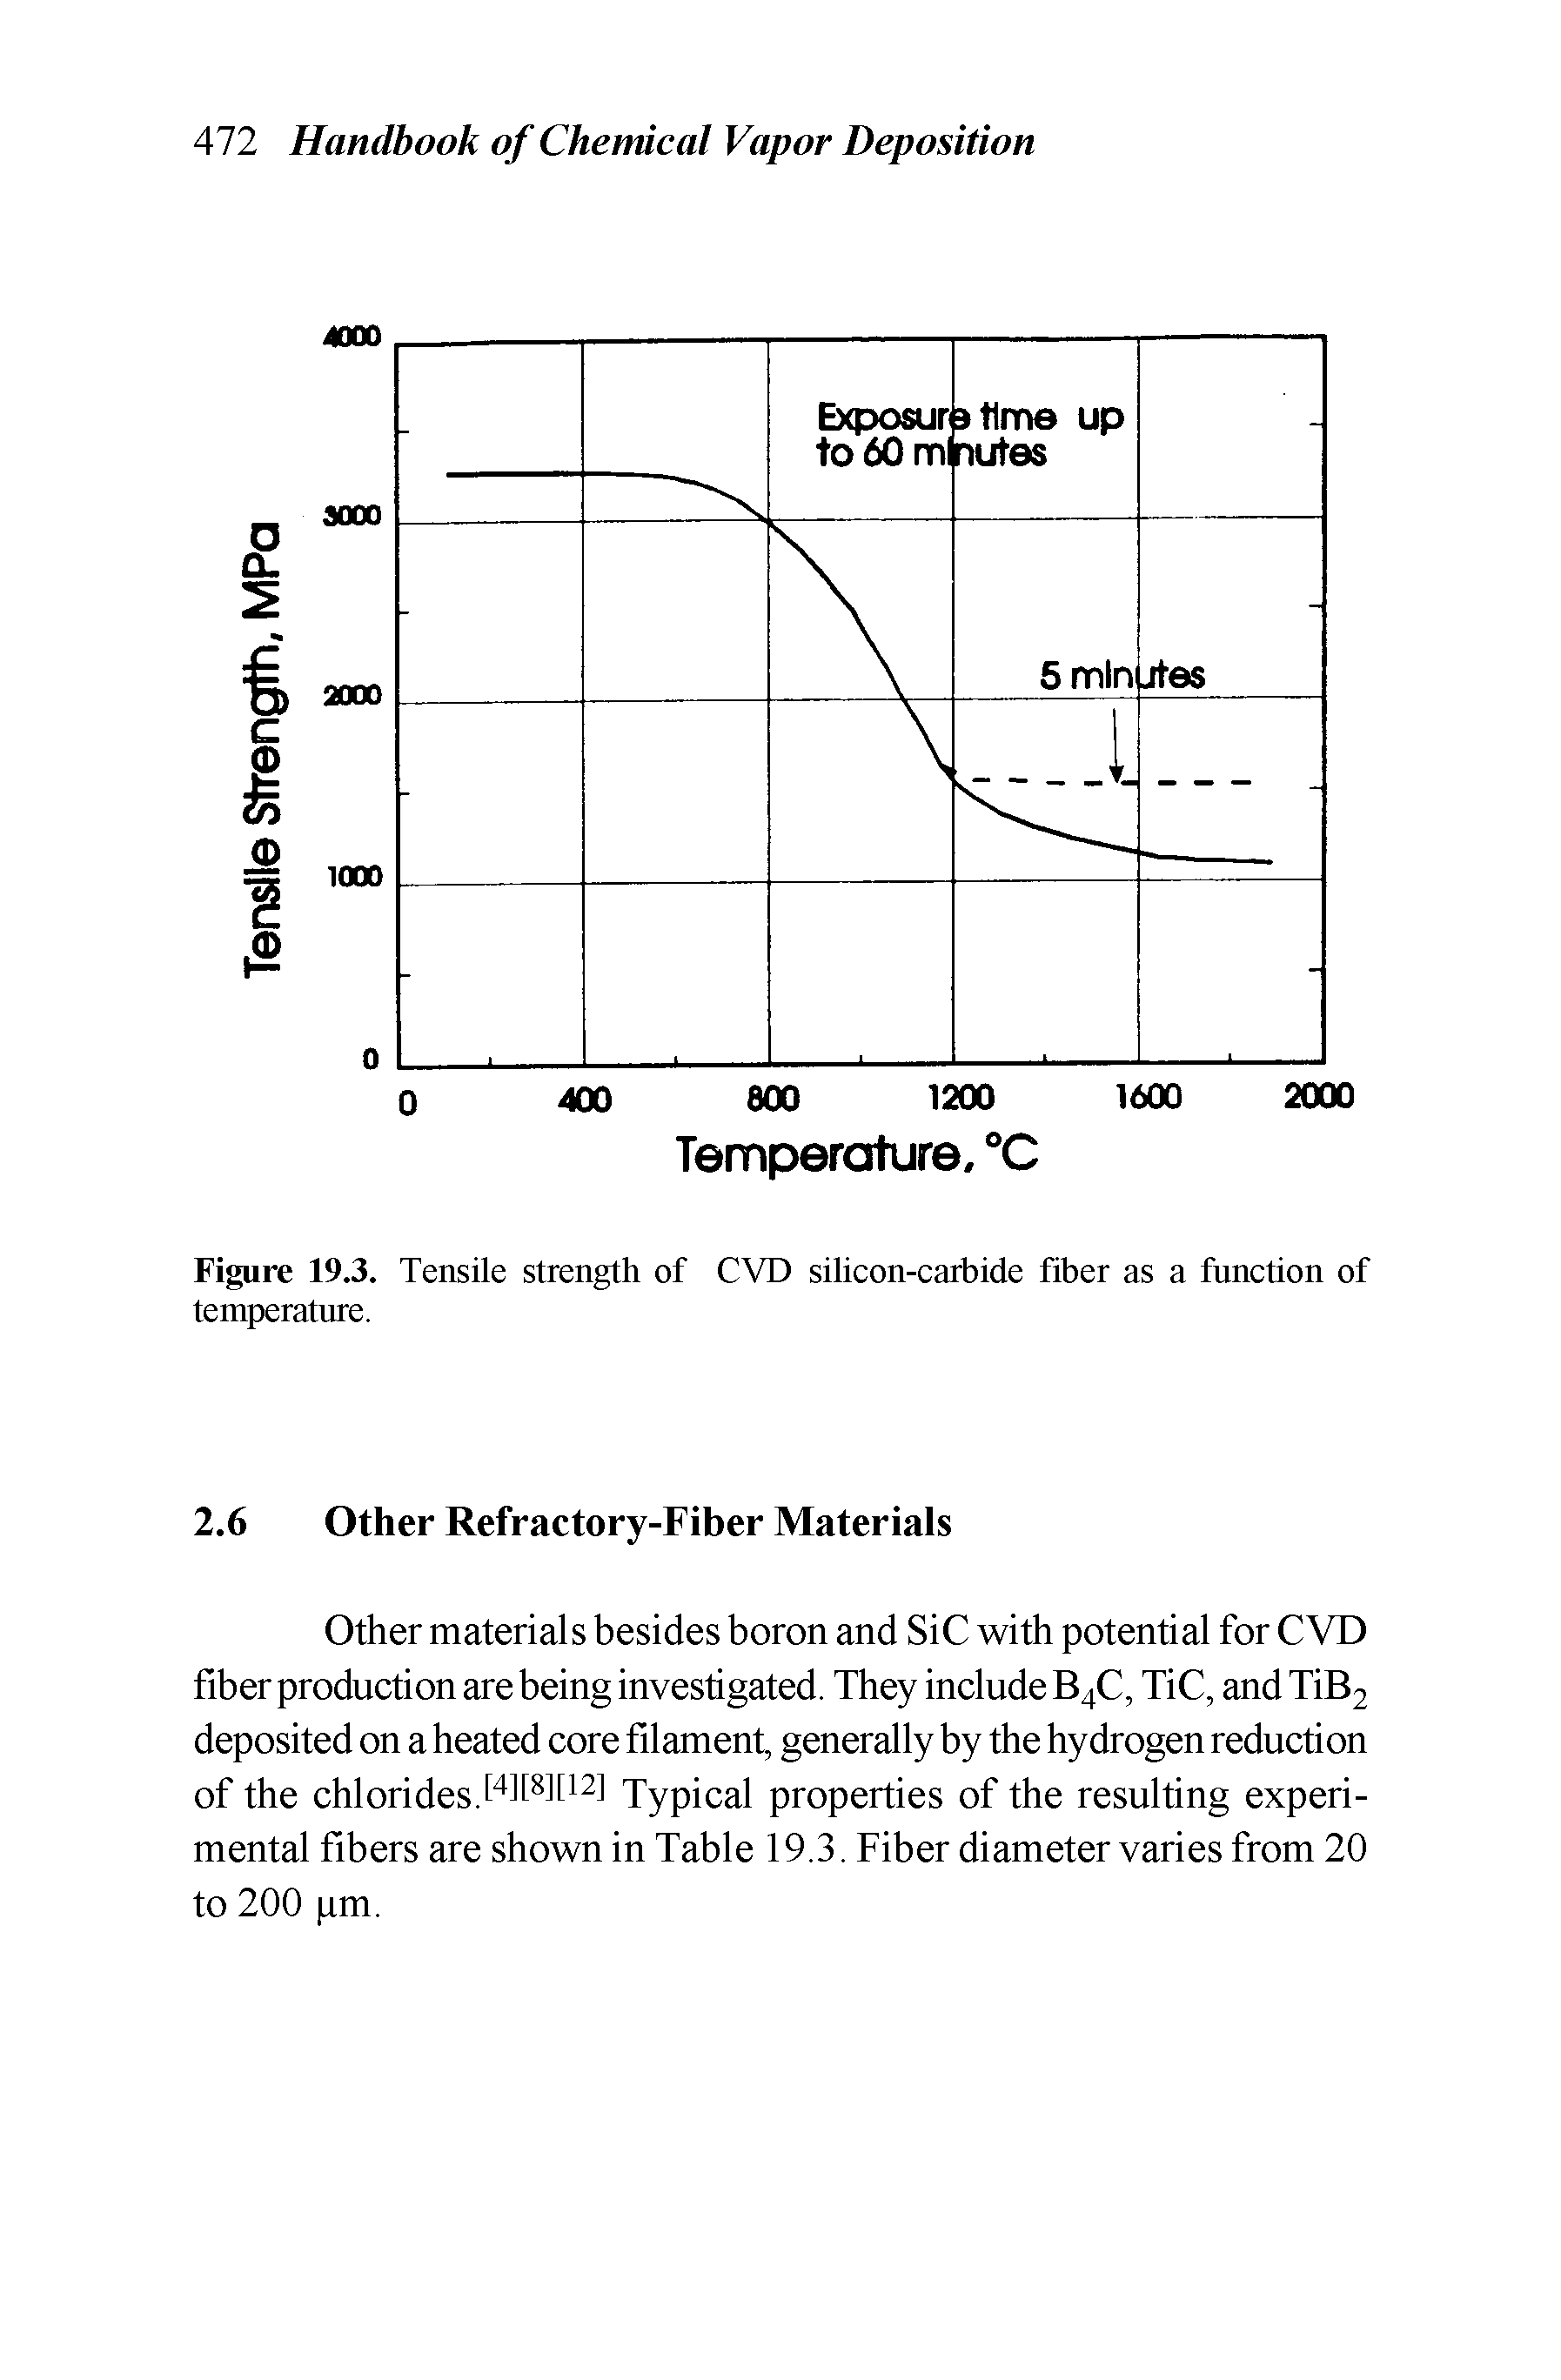 Figure 19.3. Tensile strength of CVD silicon-carbide fiber as a function of temperature.